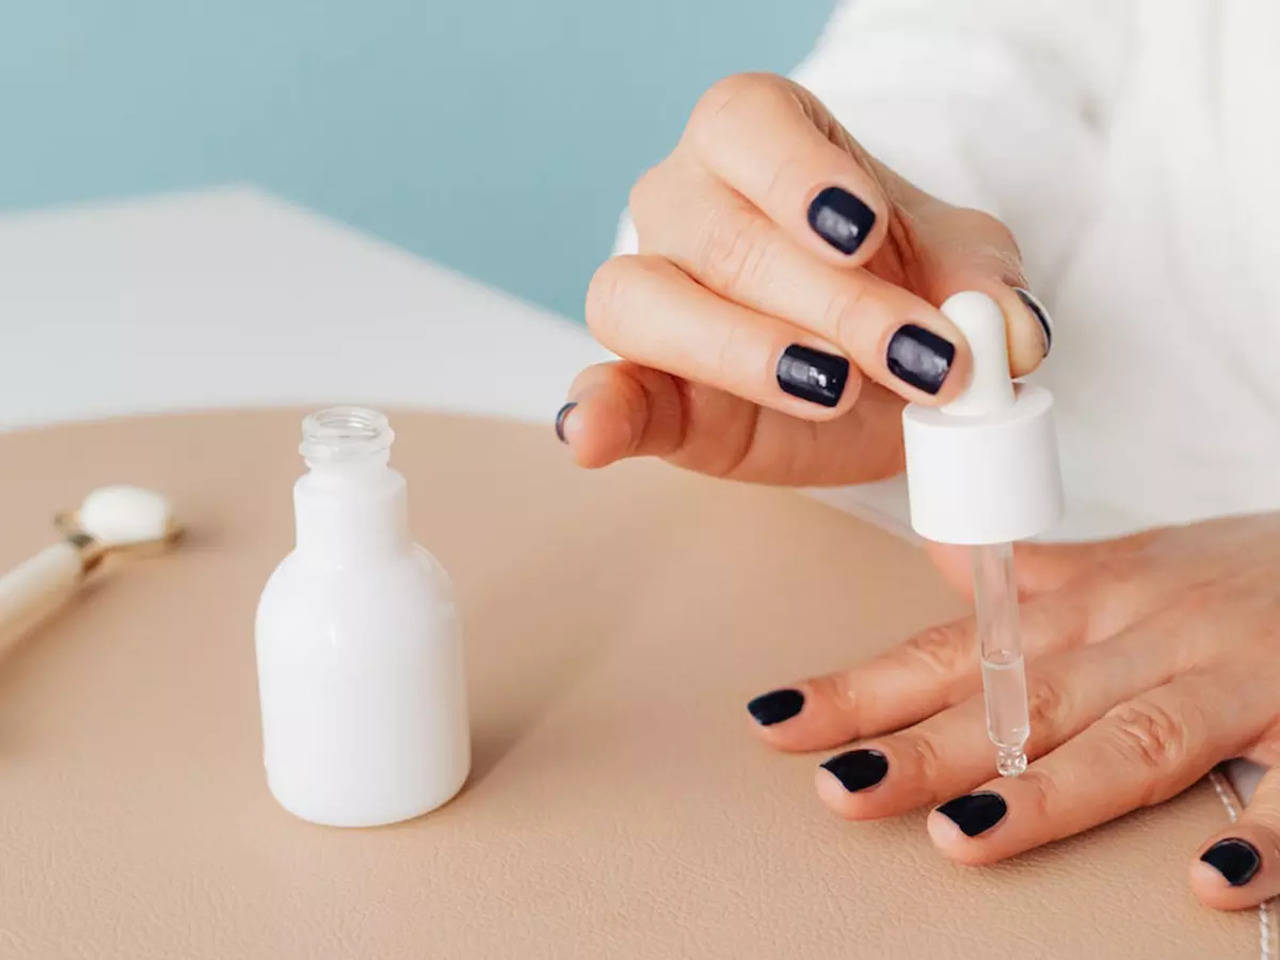 How to Clean Gel Nails: Polishing and Stain Removal